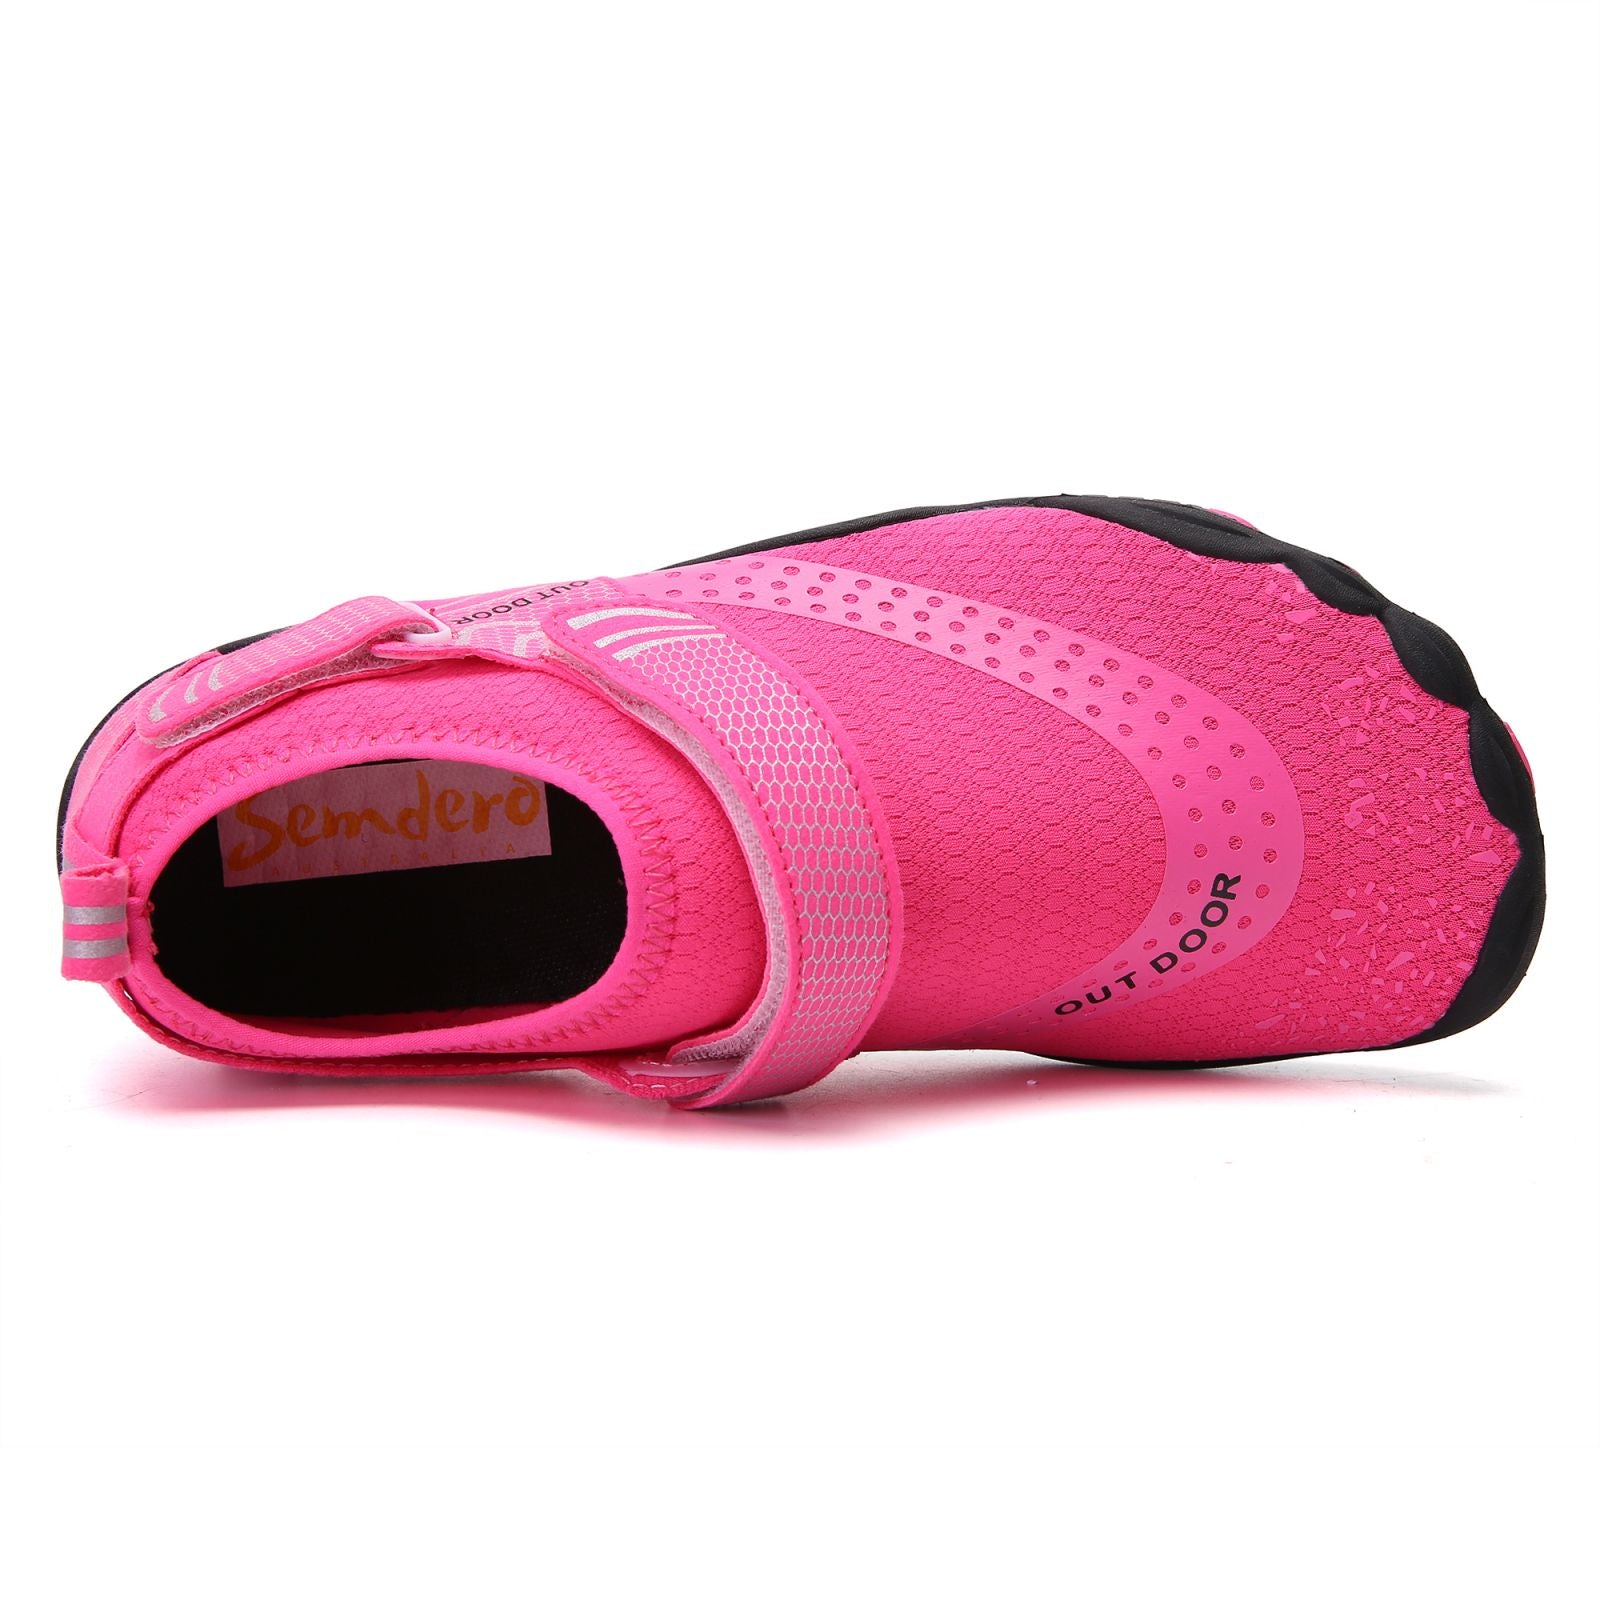 Water Shoes for Women - Barefoot Non-slip Aqua Sports Quick Dry Shoes